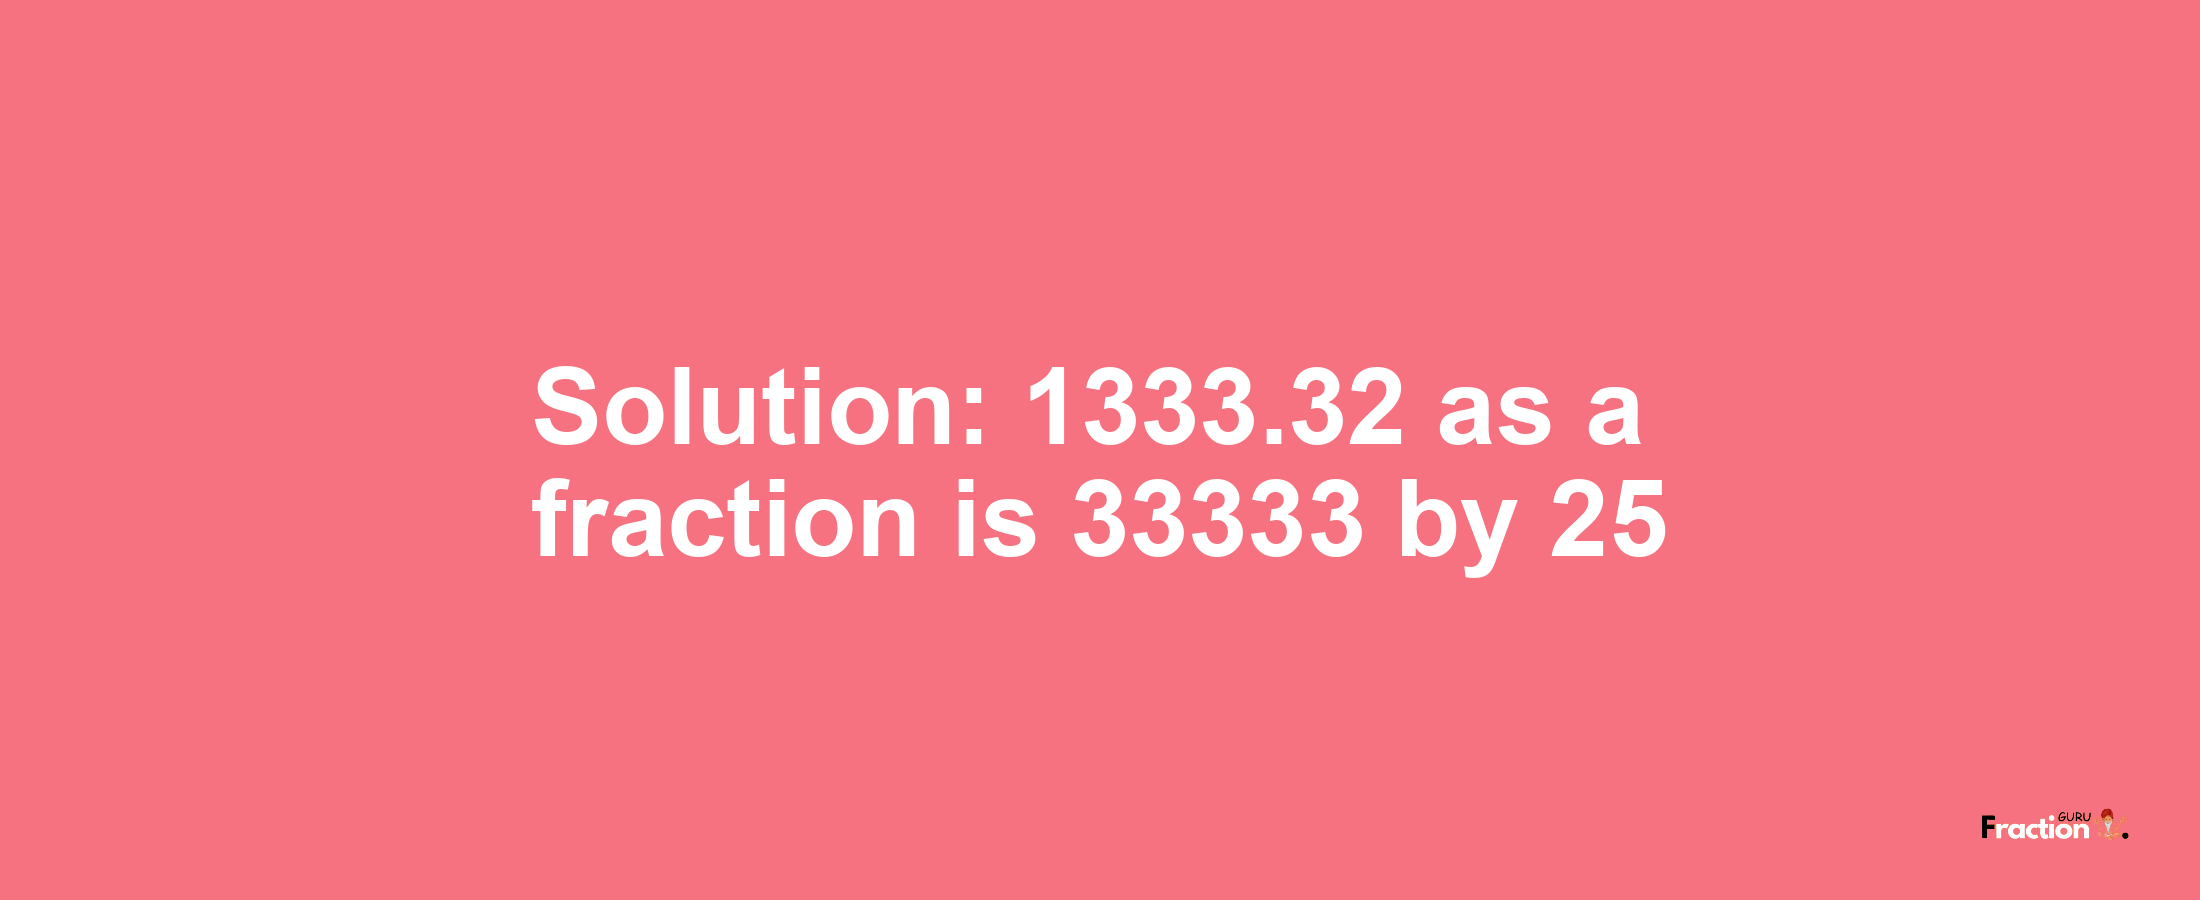 Solution:1333.32 as a fraction is 33333/25